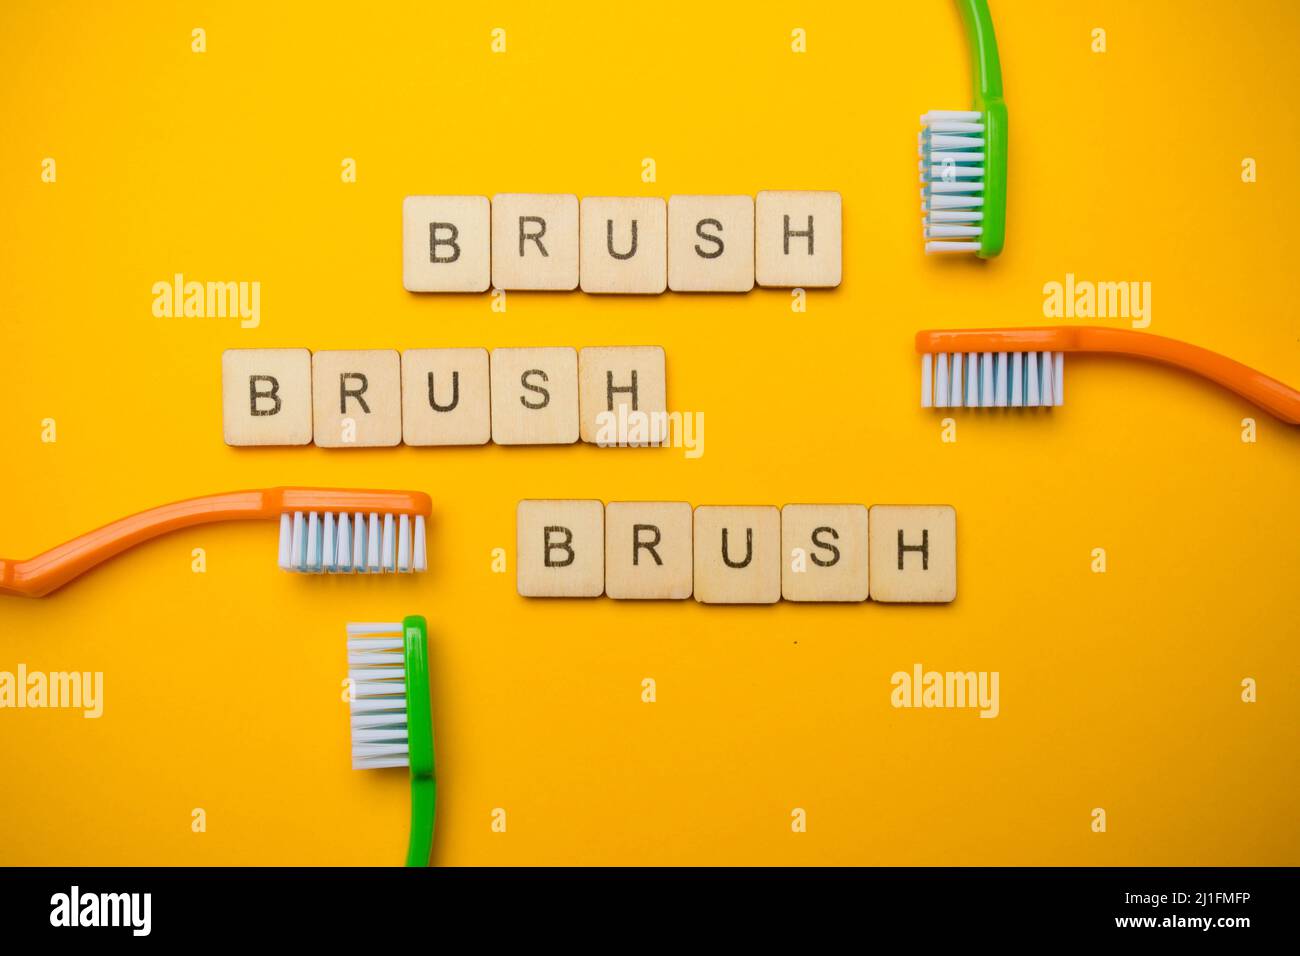 Oral and dental health concept showing four toothbrushes and a sign reading Brush Brush Brush on a yellow coloured background Stock Photo